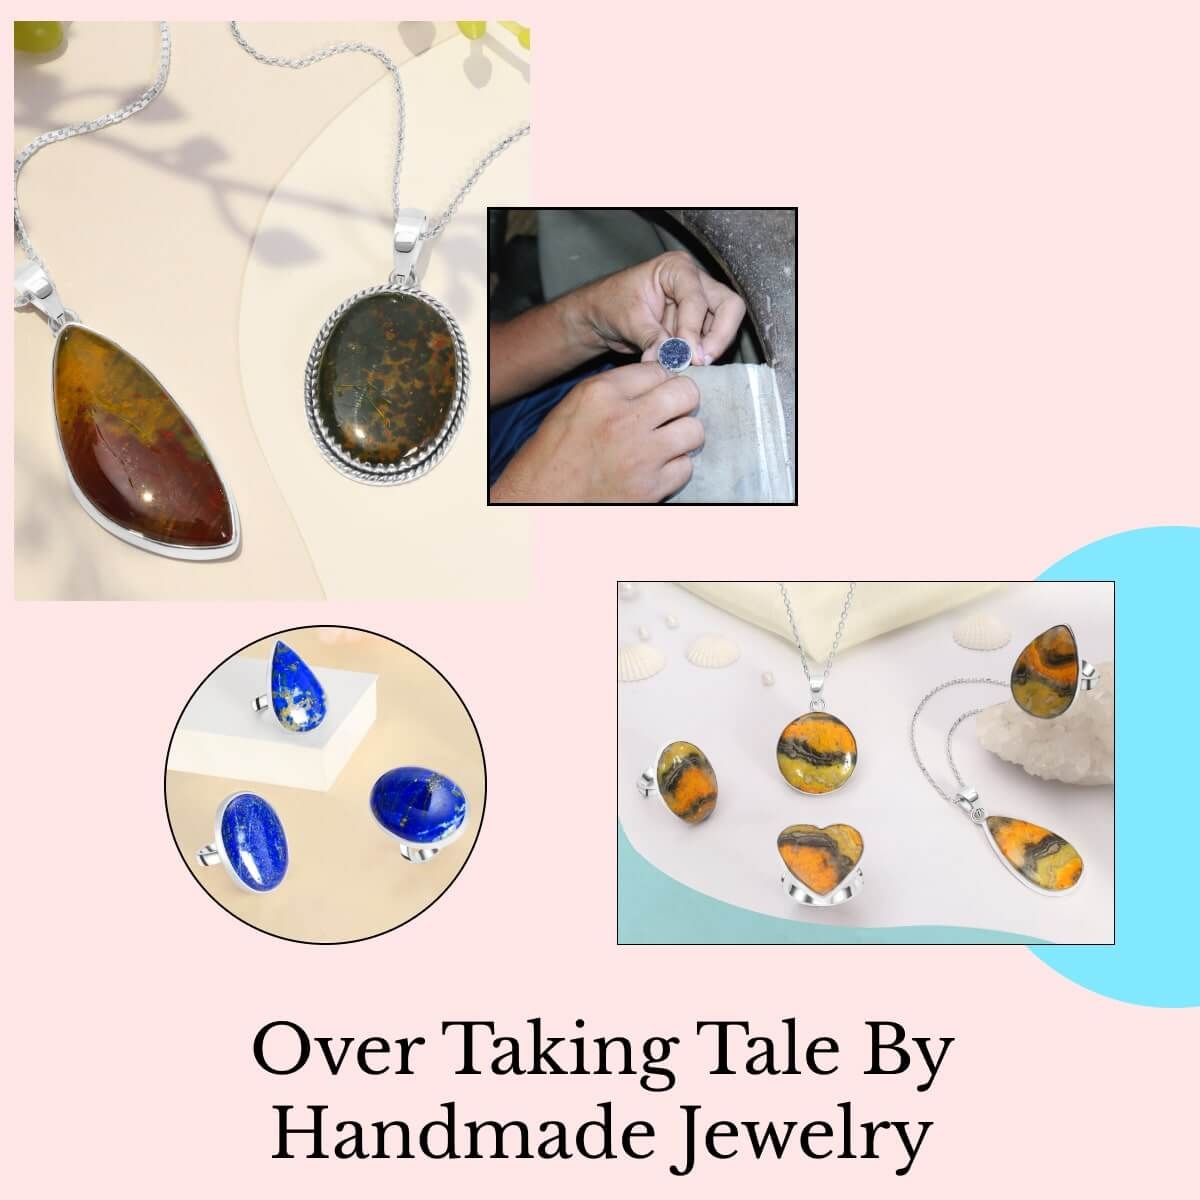 Why To Prefer Handmade Jewelry Over Others